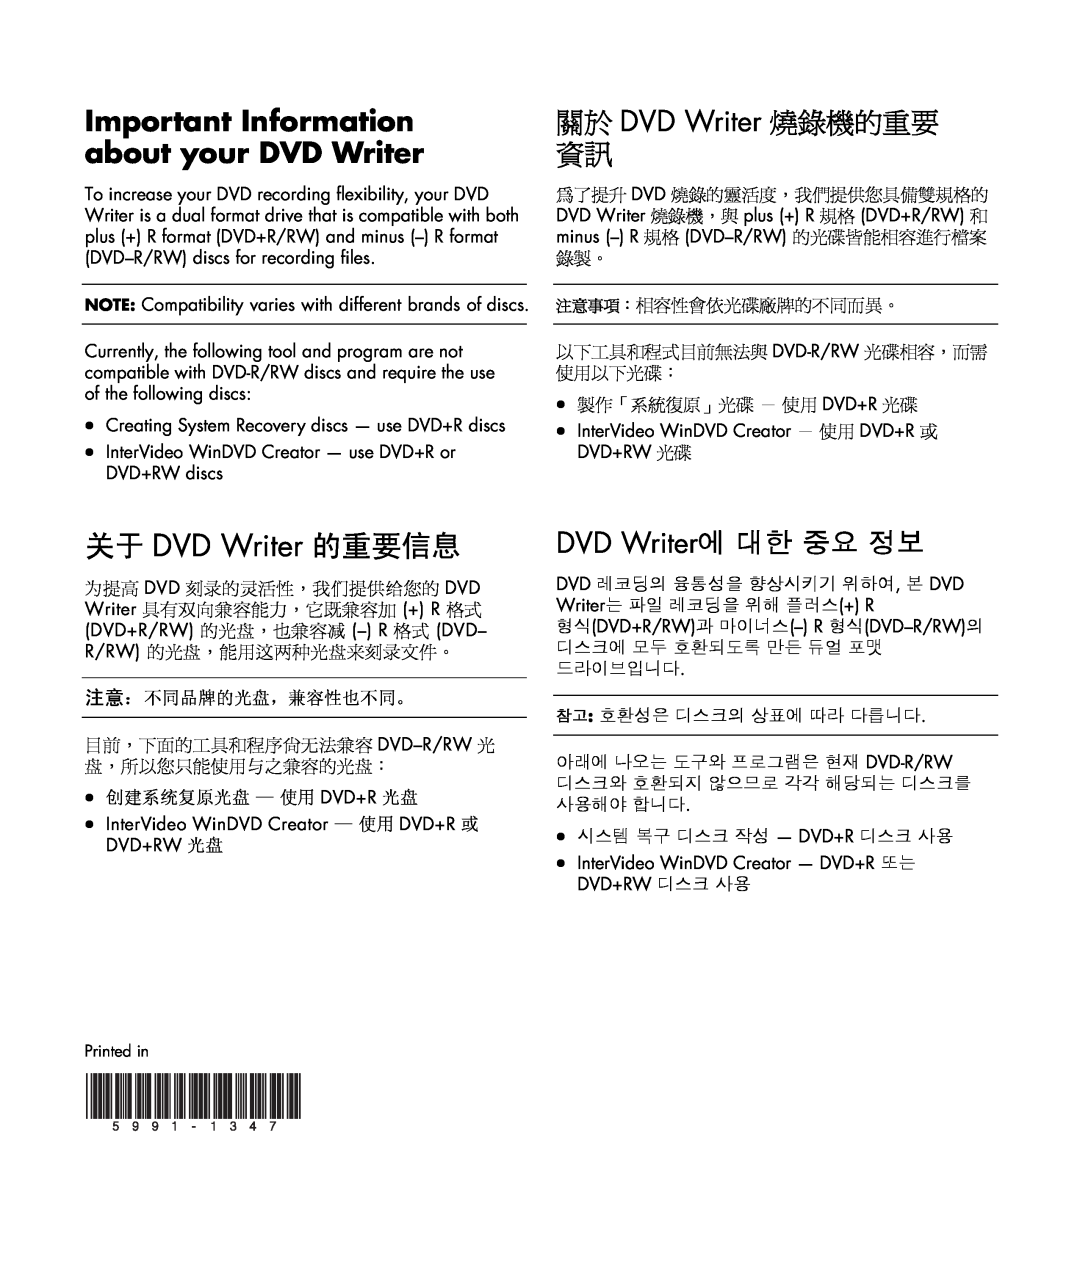 HP m1288cn, m1298cn manual 关于 DVD Writer 的重要信息, Important Information about your DVD Writer, 關於 DVD Writer 燒錄機的重要 資訊 